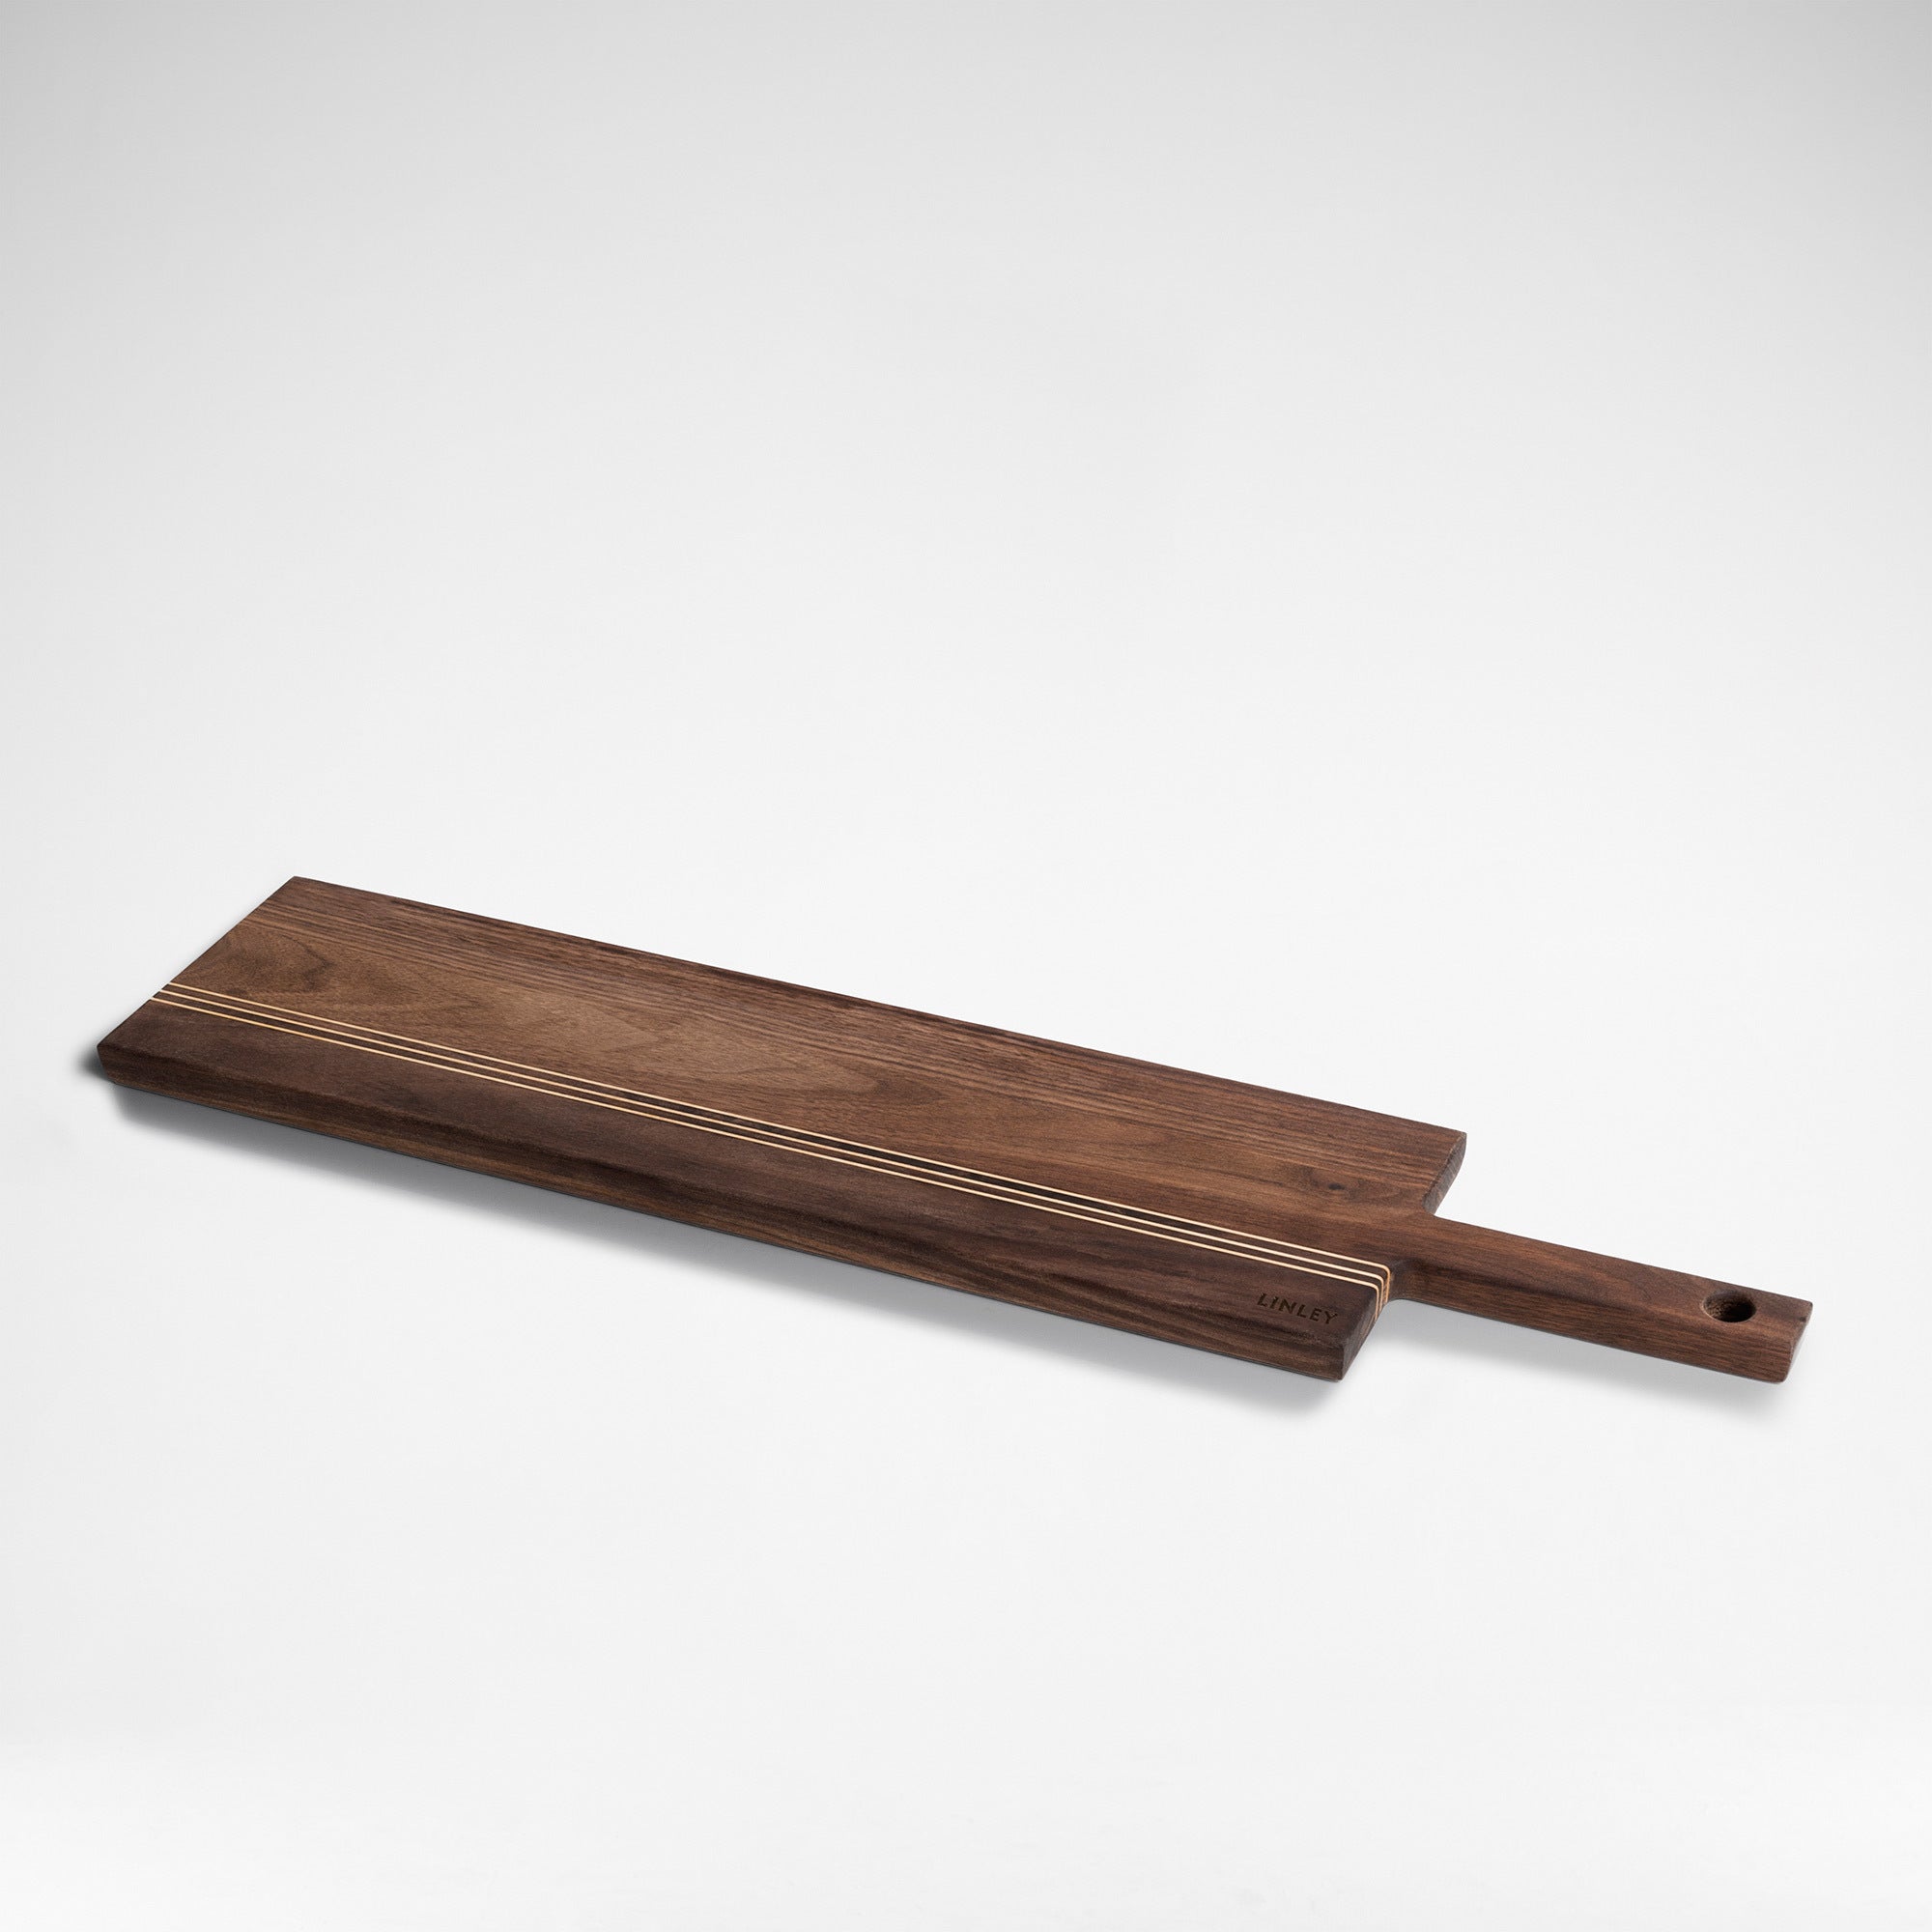 LINLEY Cuisine Serving Board | Luxury Home Accessories & Gifts | LINLEY